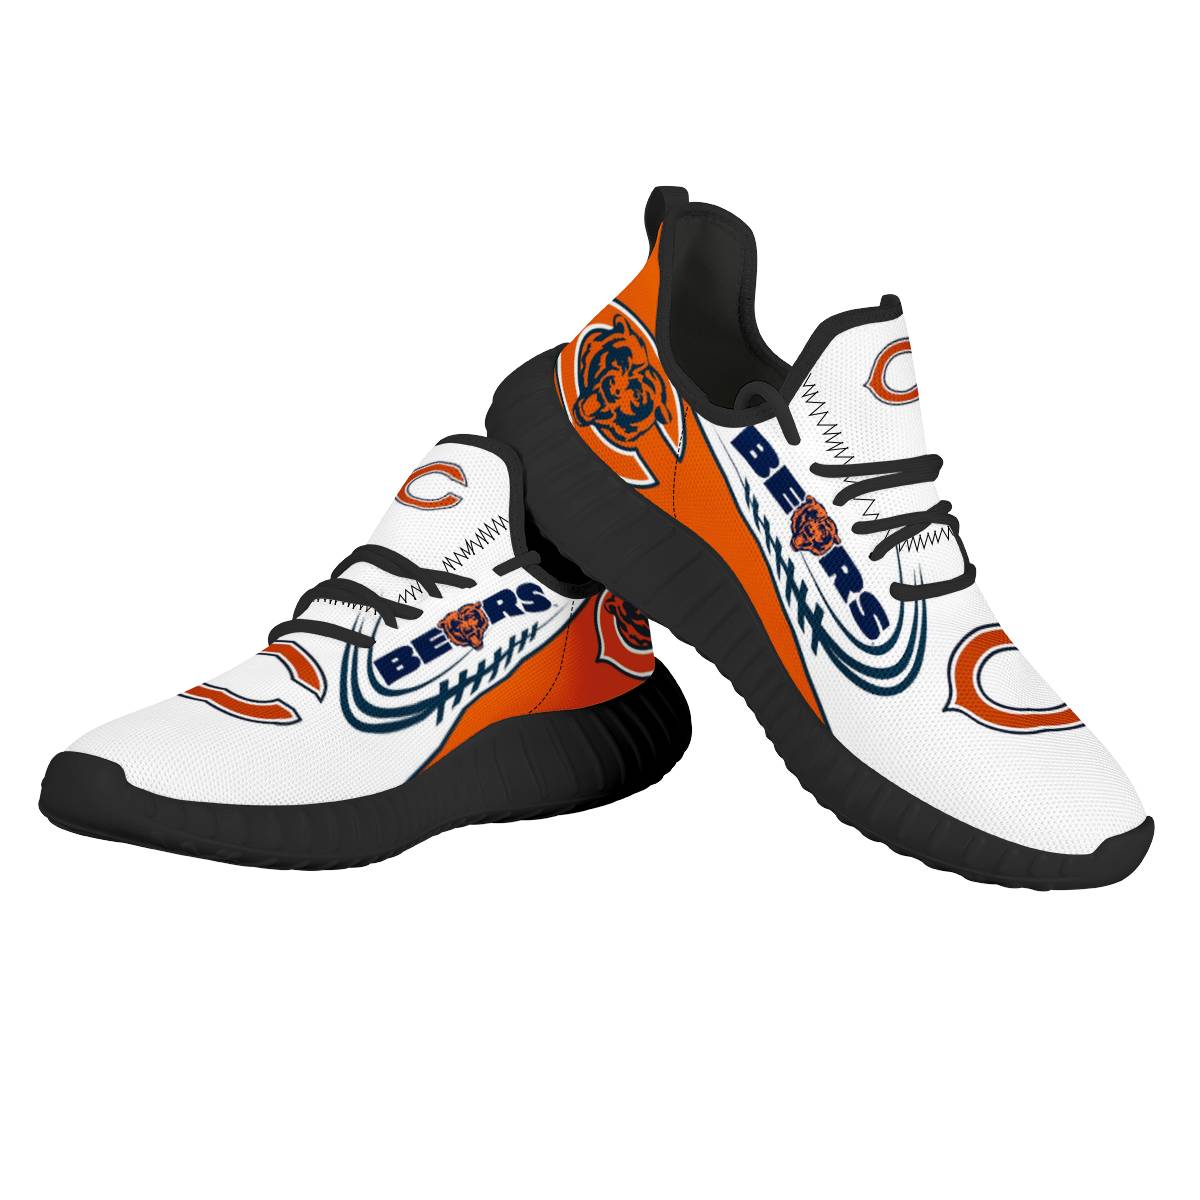 Women's Chicago Bears Mesh Knit Sneakers/Shoes 009